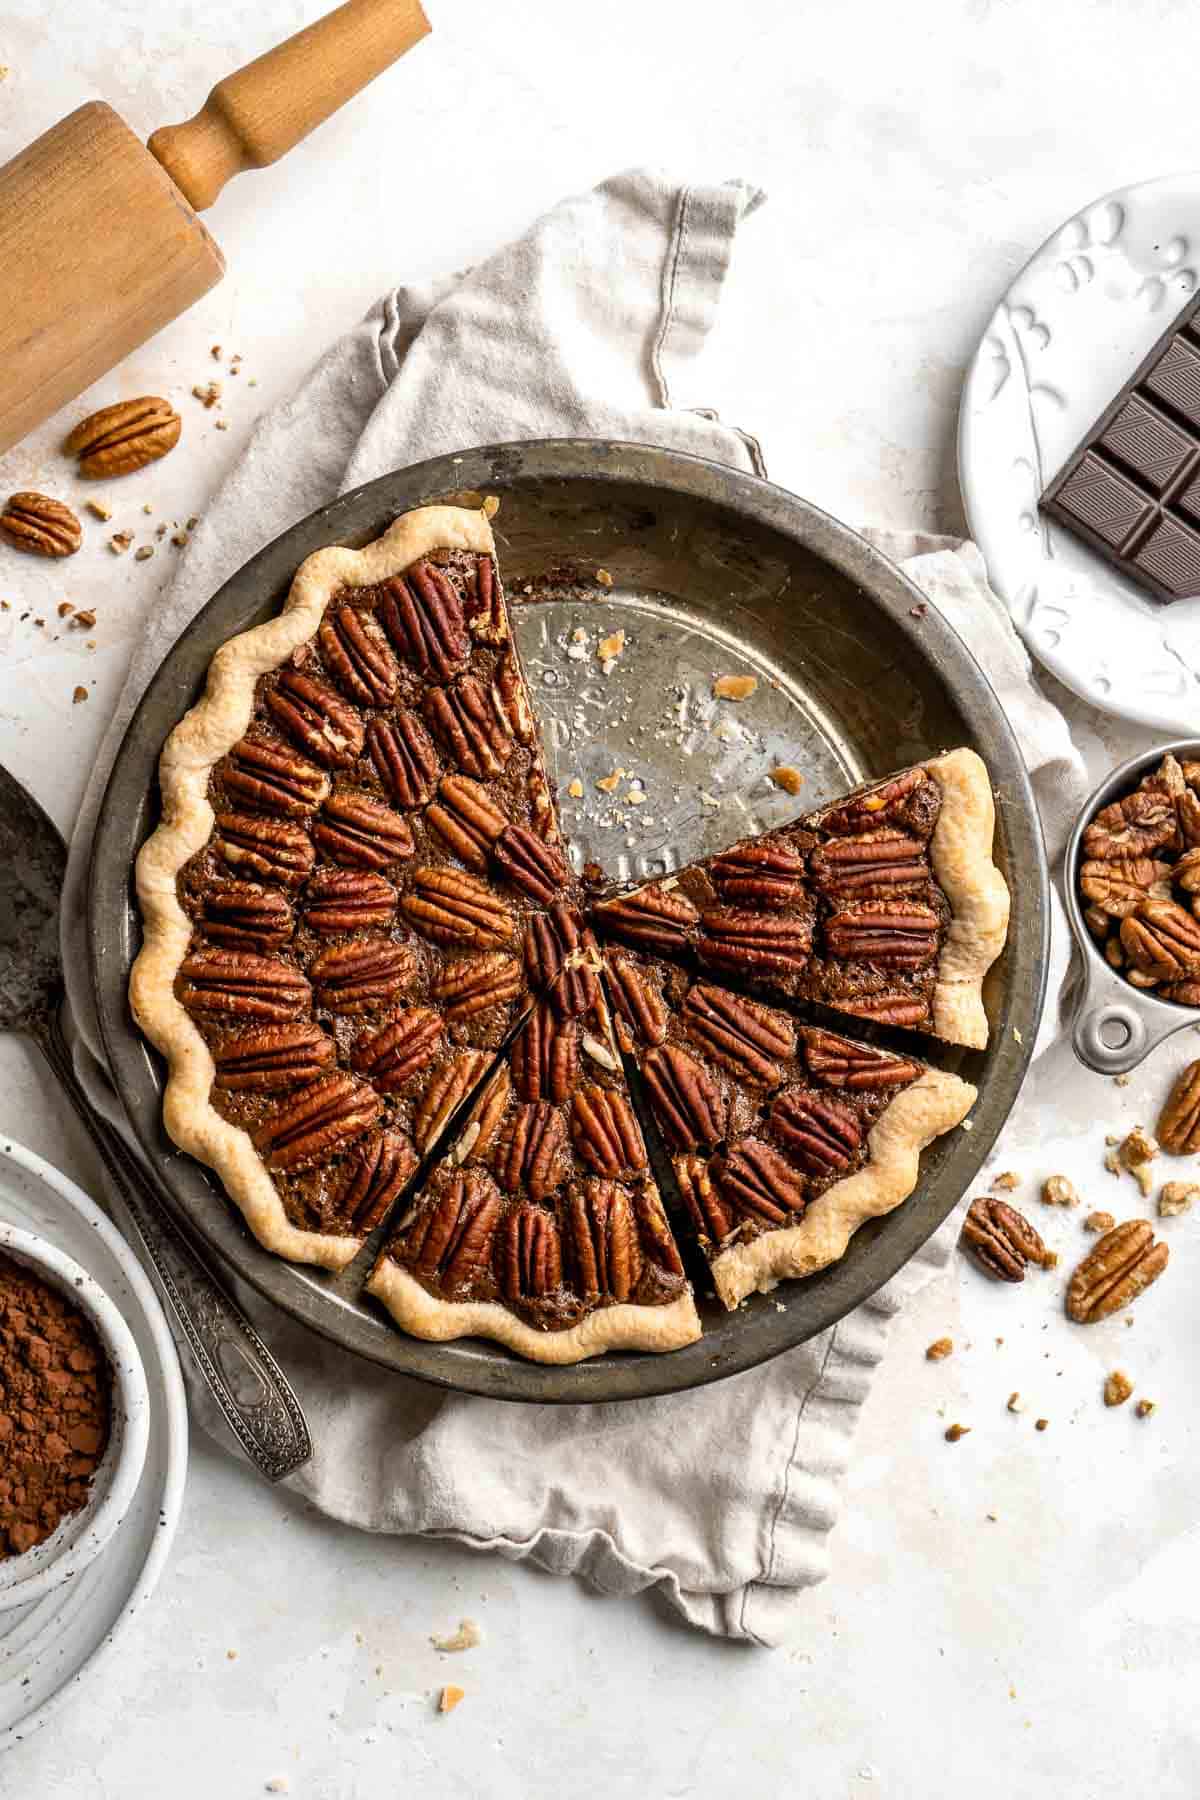 This decadent Chocolate Pecan Pie is a twist on the classic holiday pie with a rich, dark chocolate flavor that pairs wonderfully with toasted pecans. | aheadofthyme.com